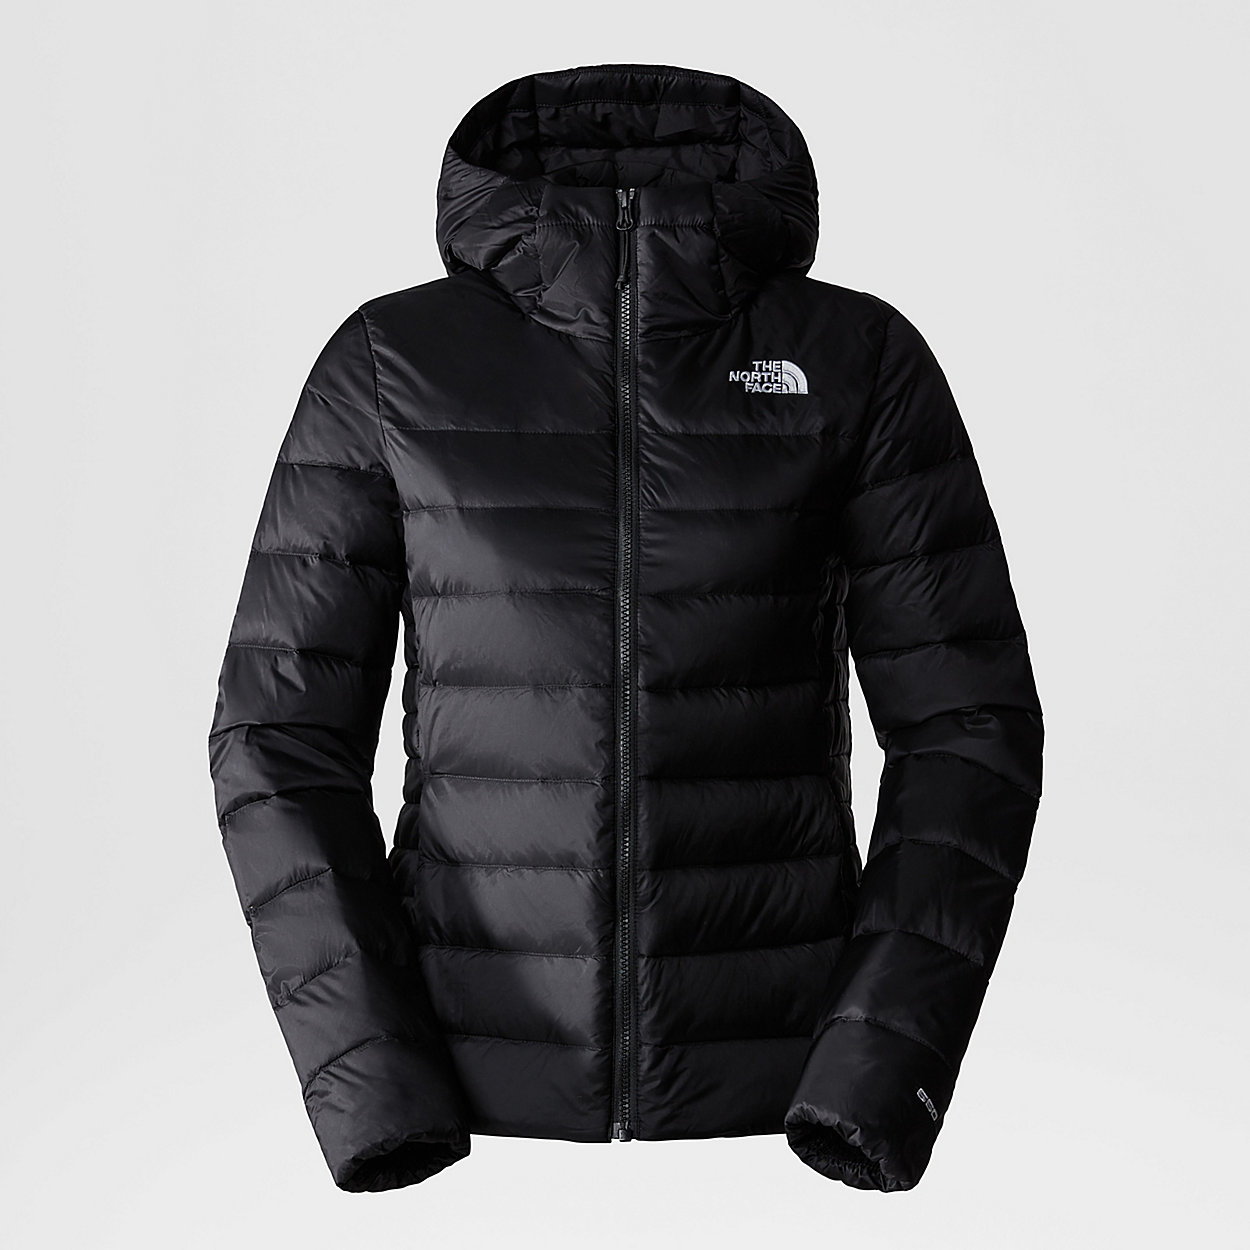 Unlock Wilderness' choice in the Berghaus Vs North Face comparison, the Aconcagua Hooded Down Jacket by The North Face